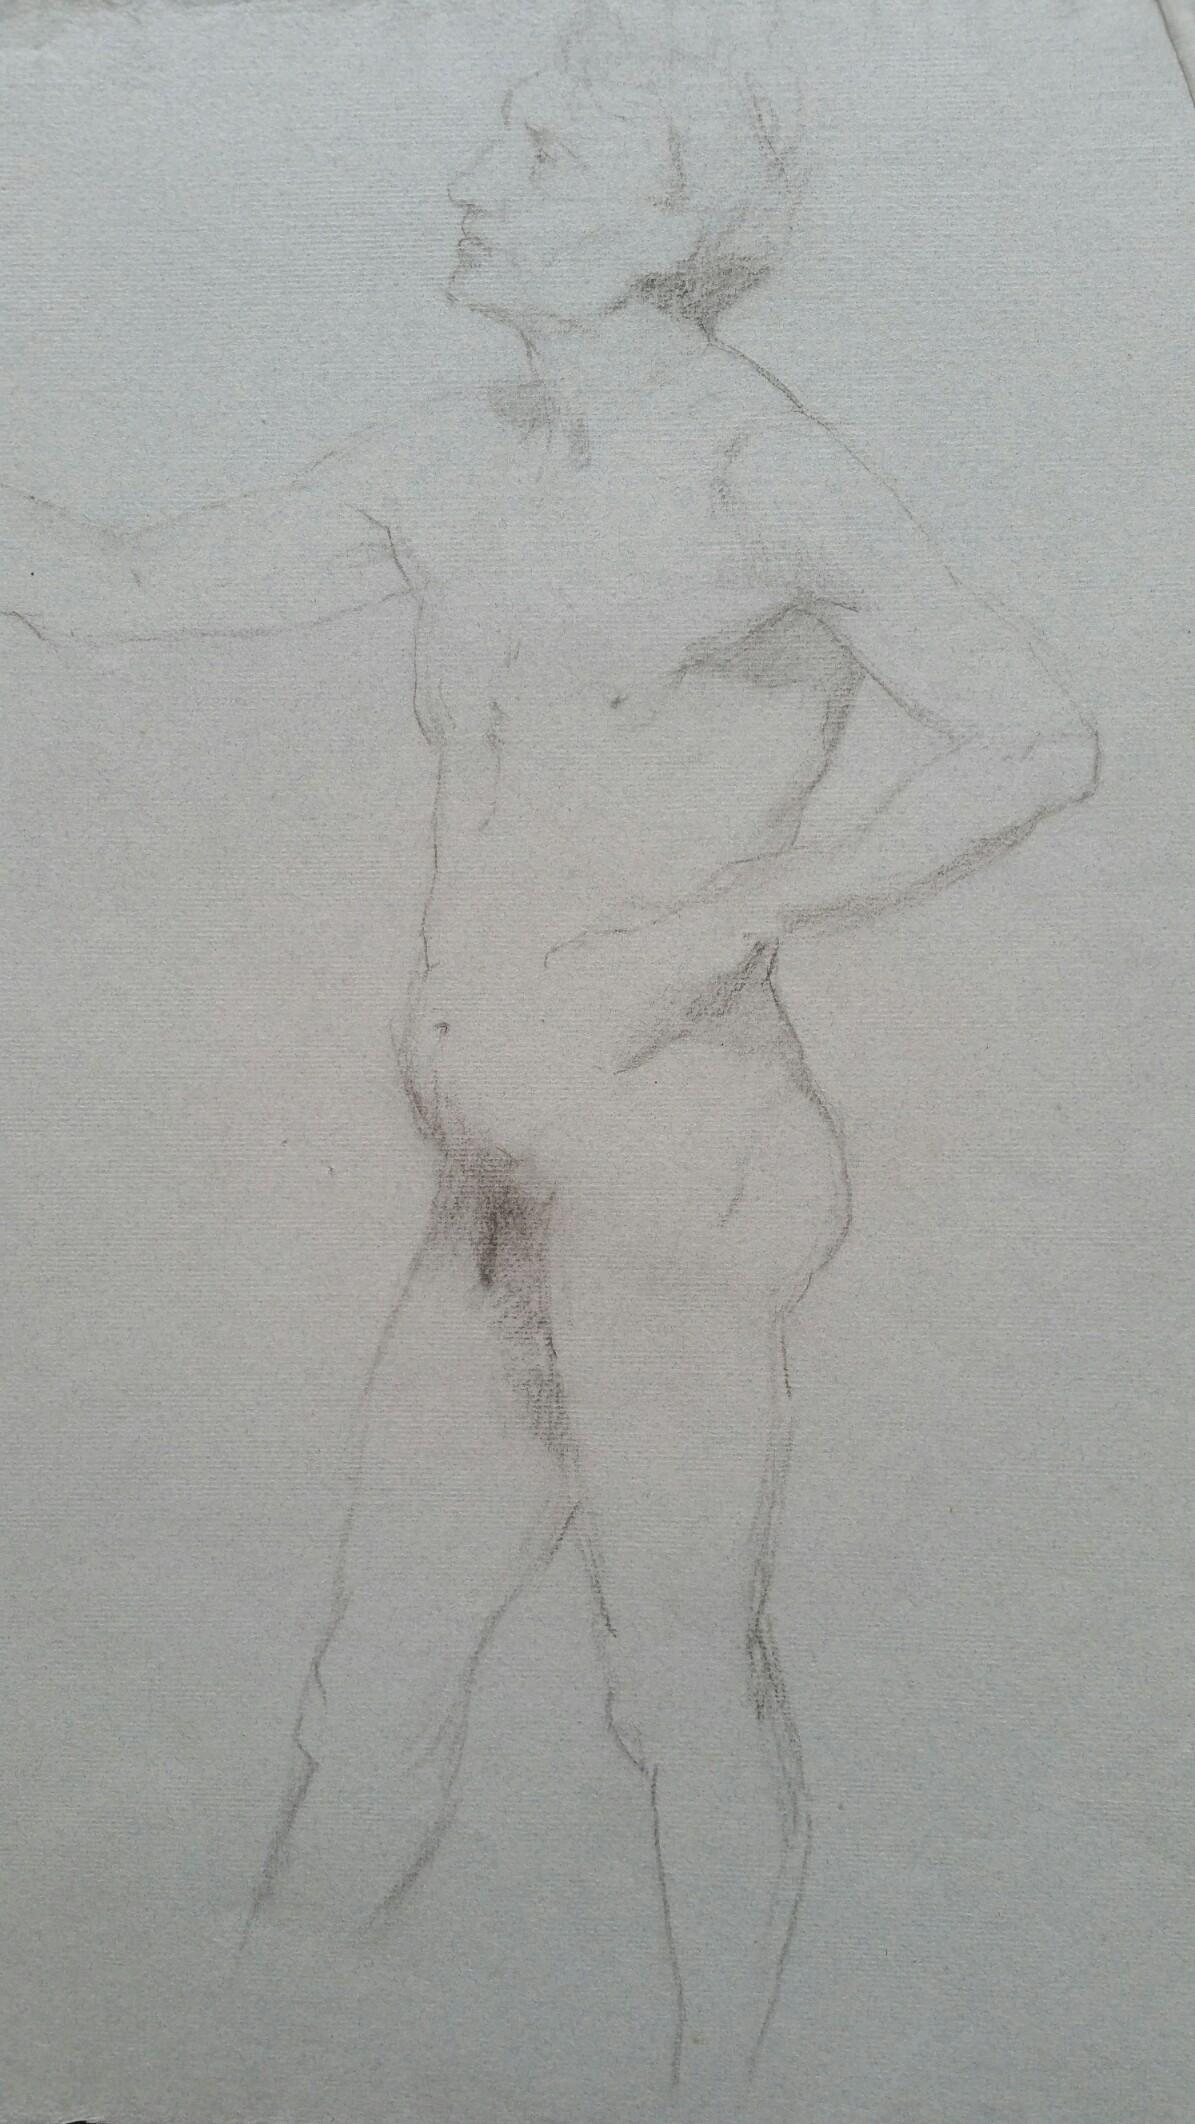 English Graphite Portrait Sketch of Male Nude, in Profile - Art by Henry George Moon